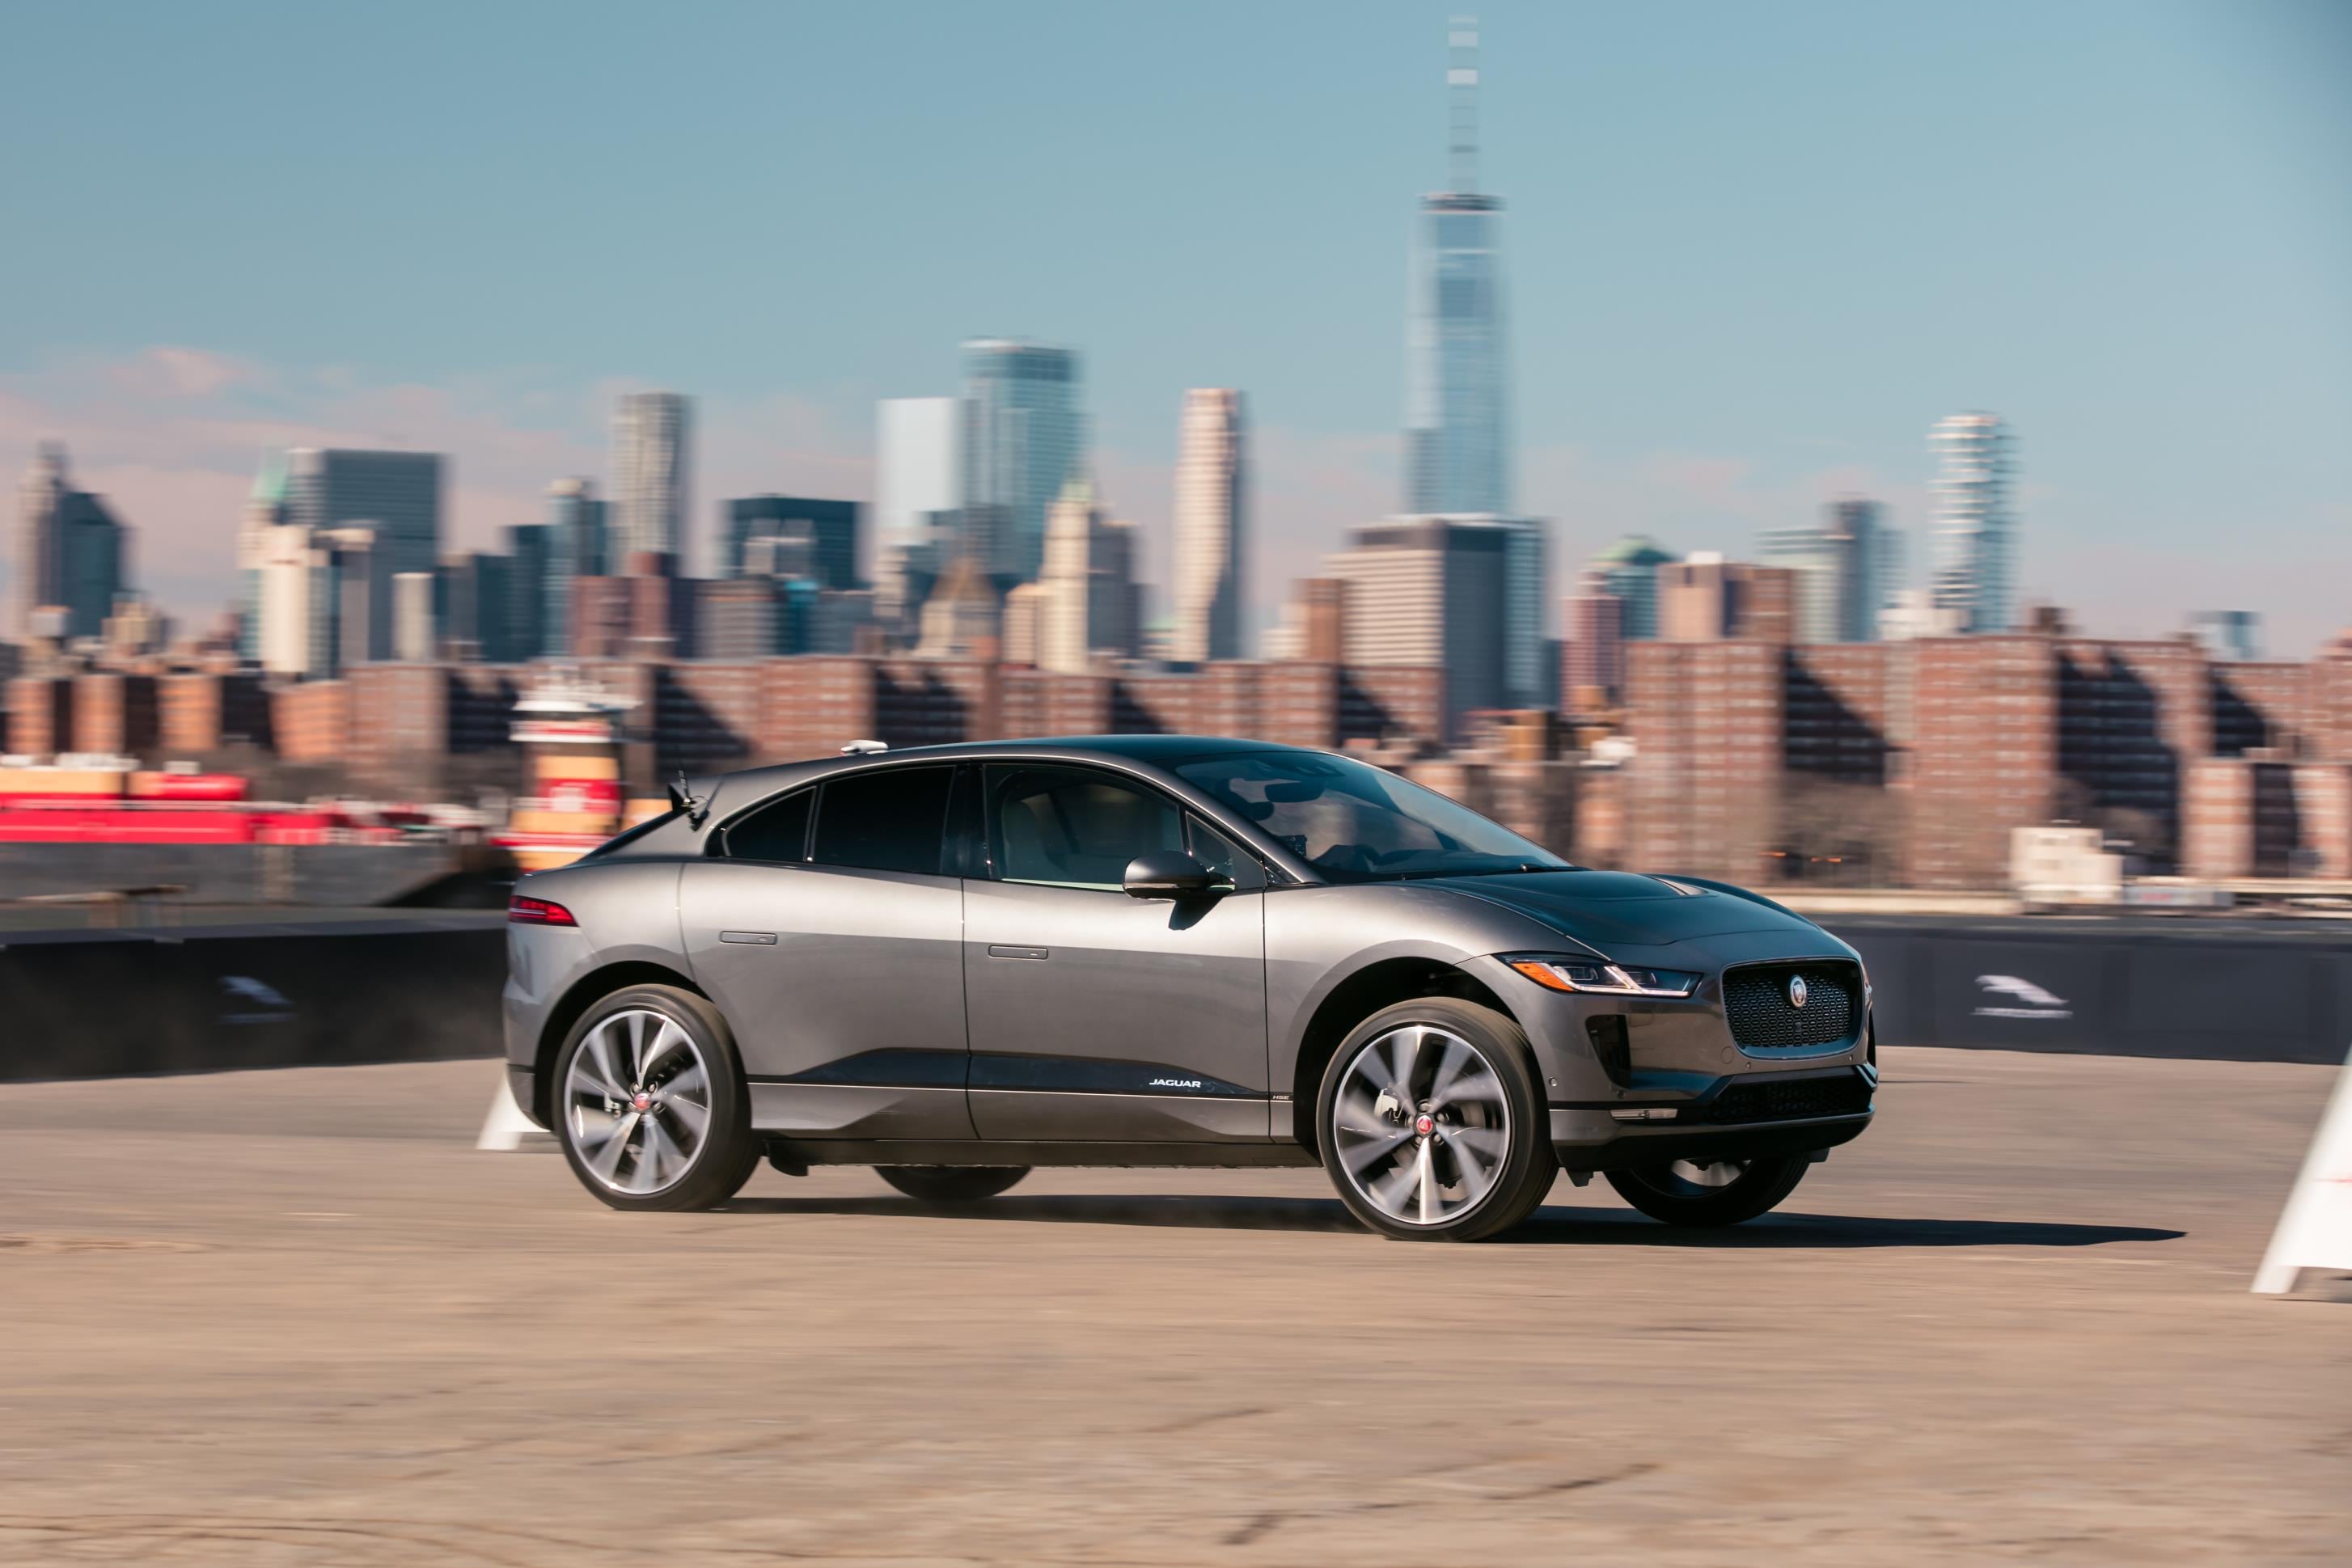 Will most of us soon be driving electric SUVs like the i-Pace concept?